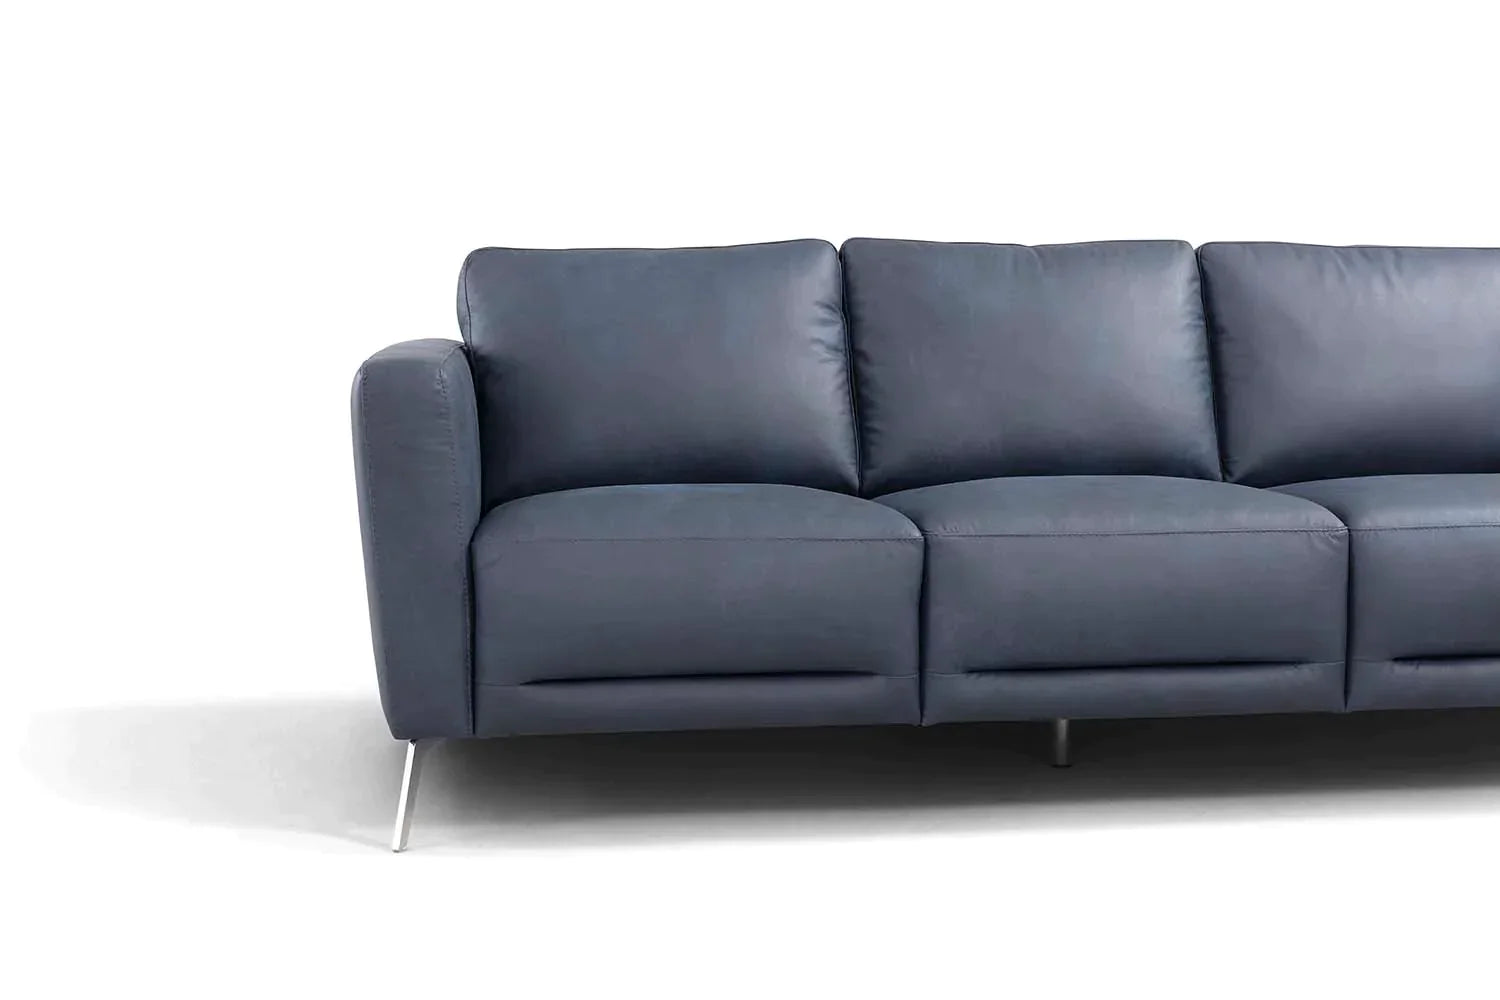 Astonic Blue Leather Sofa Model LV00212 By ACME Furniture